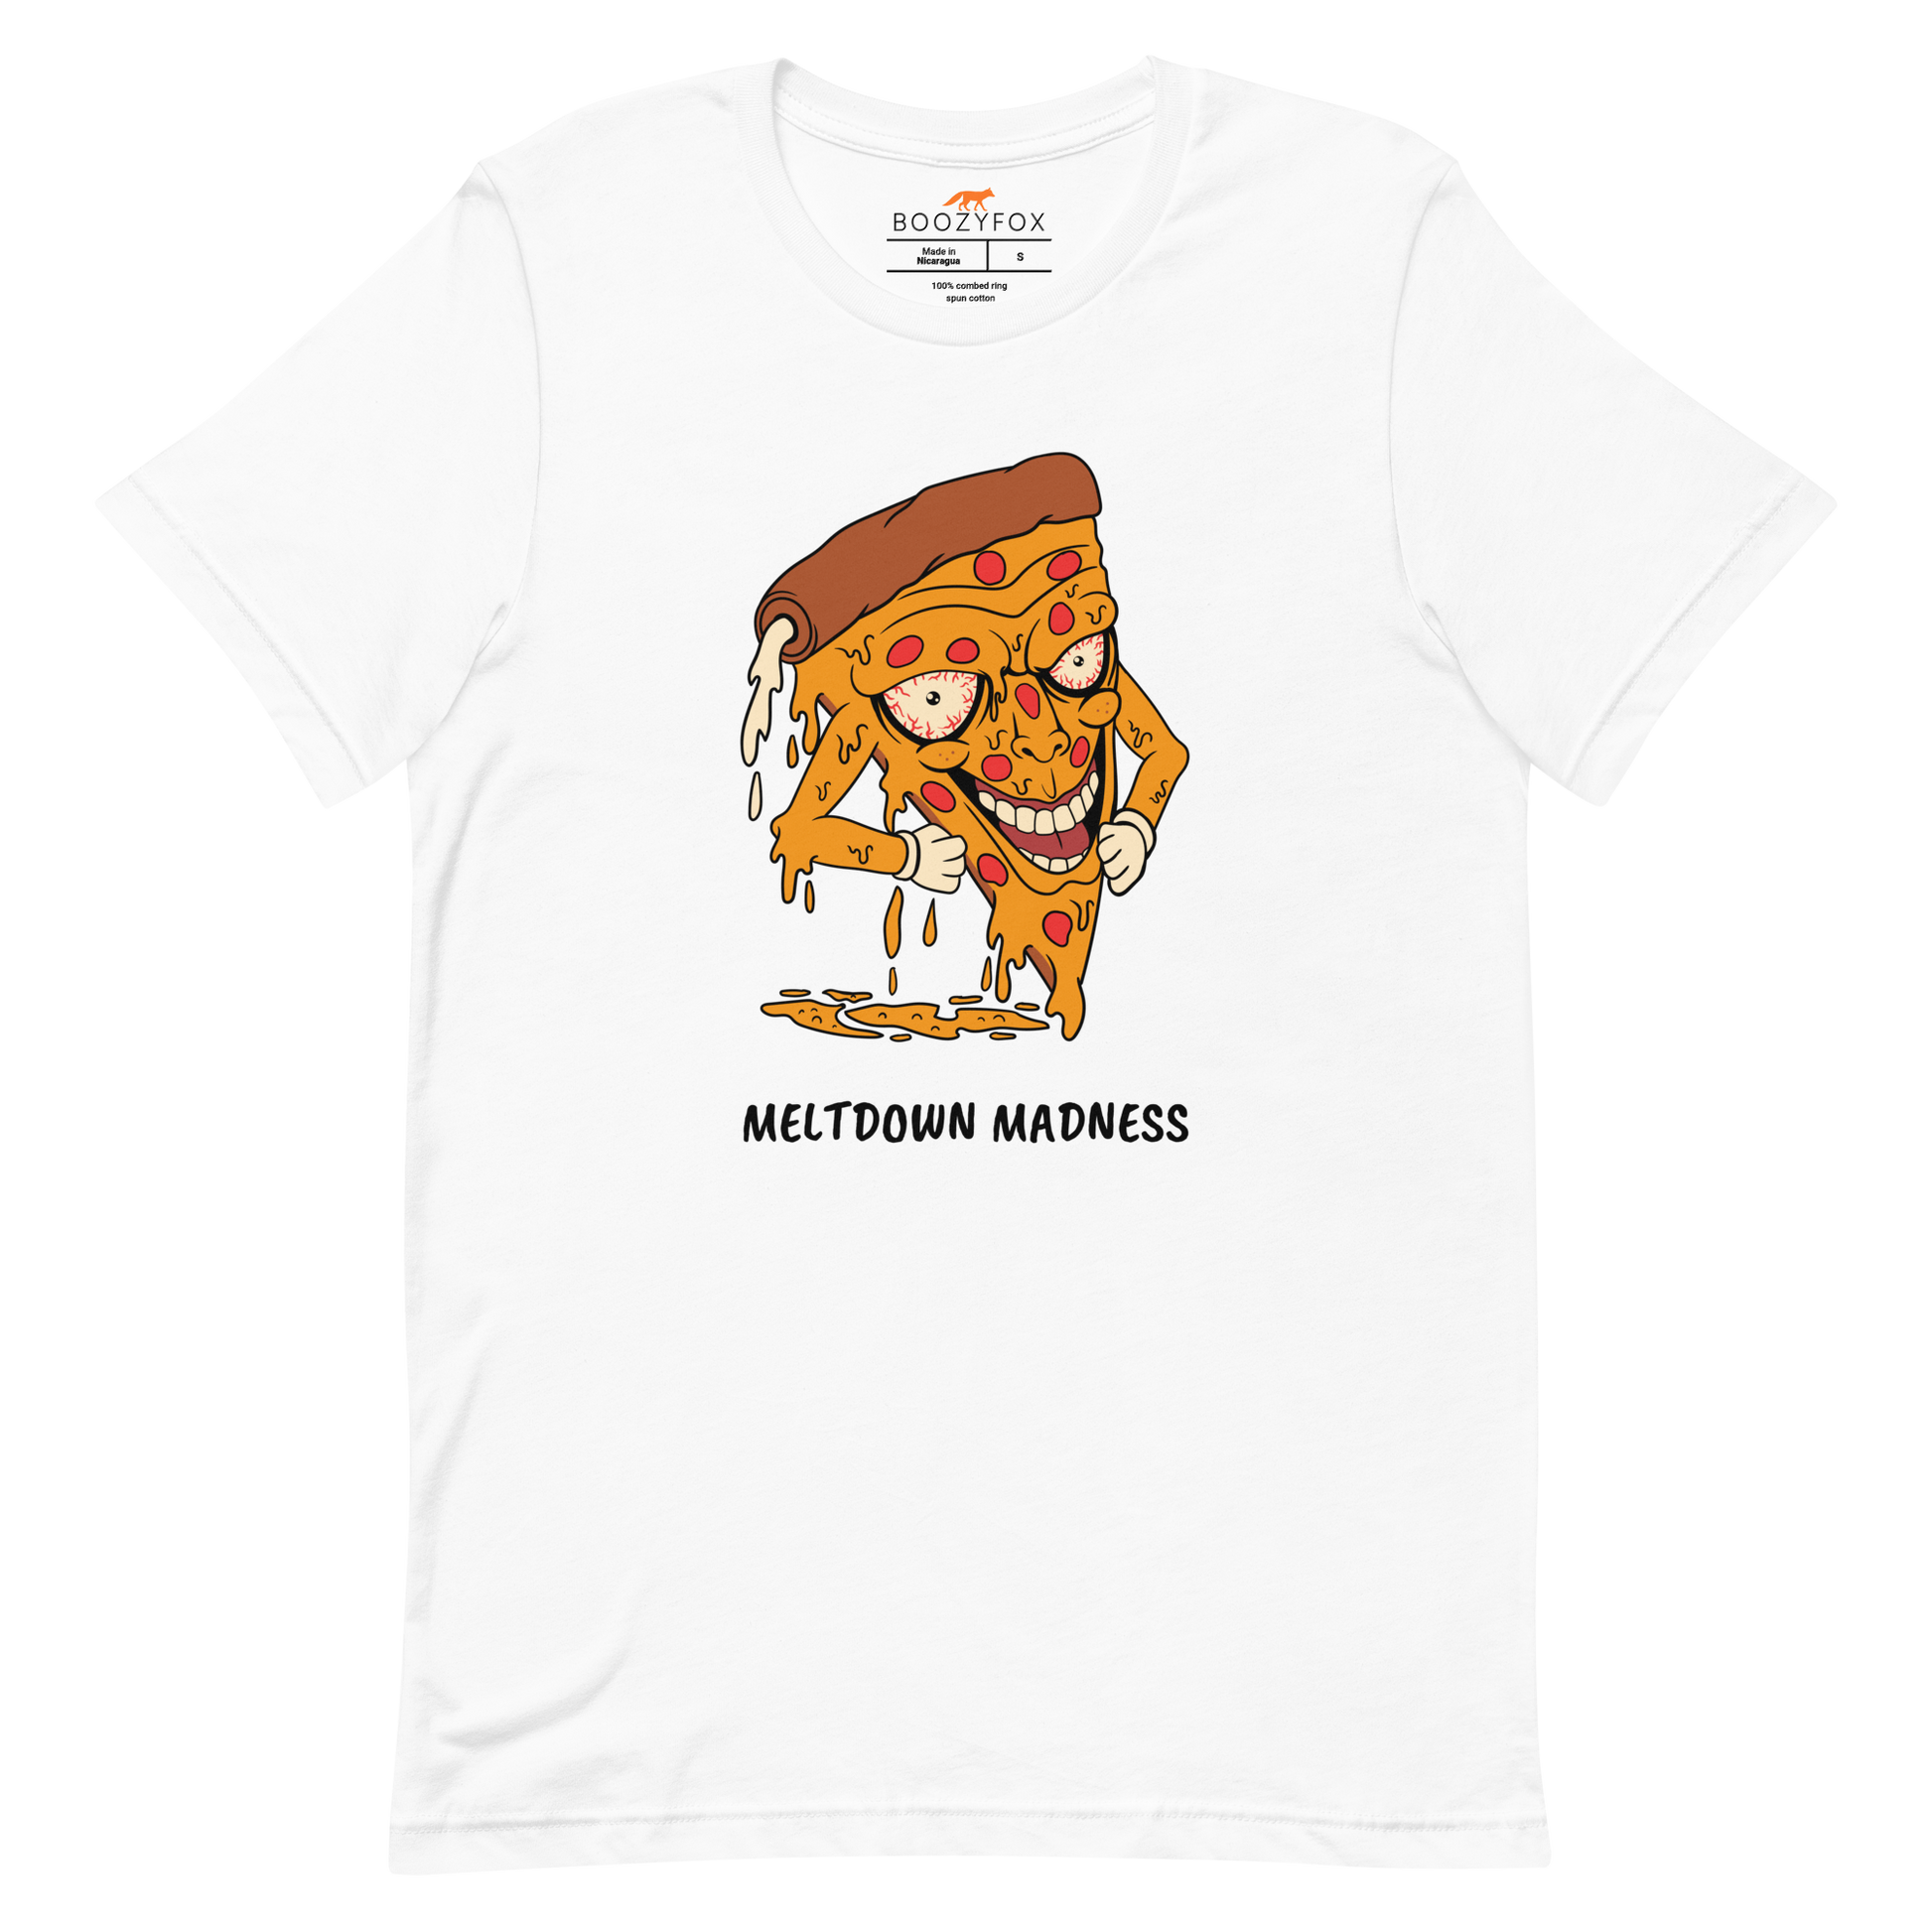 White Premium Melting Pizza Tee featuring a Meltdown Madness graphic on the chest - Funny Graphic Pizza Tees - Boozy Fox